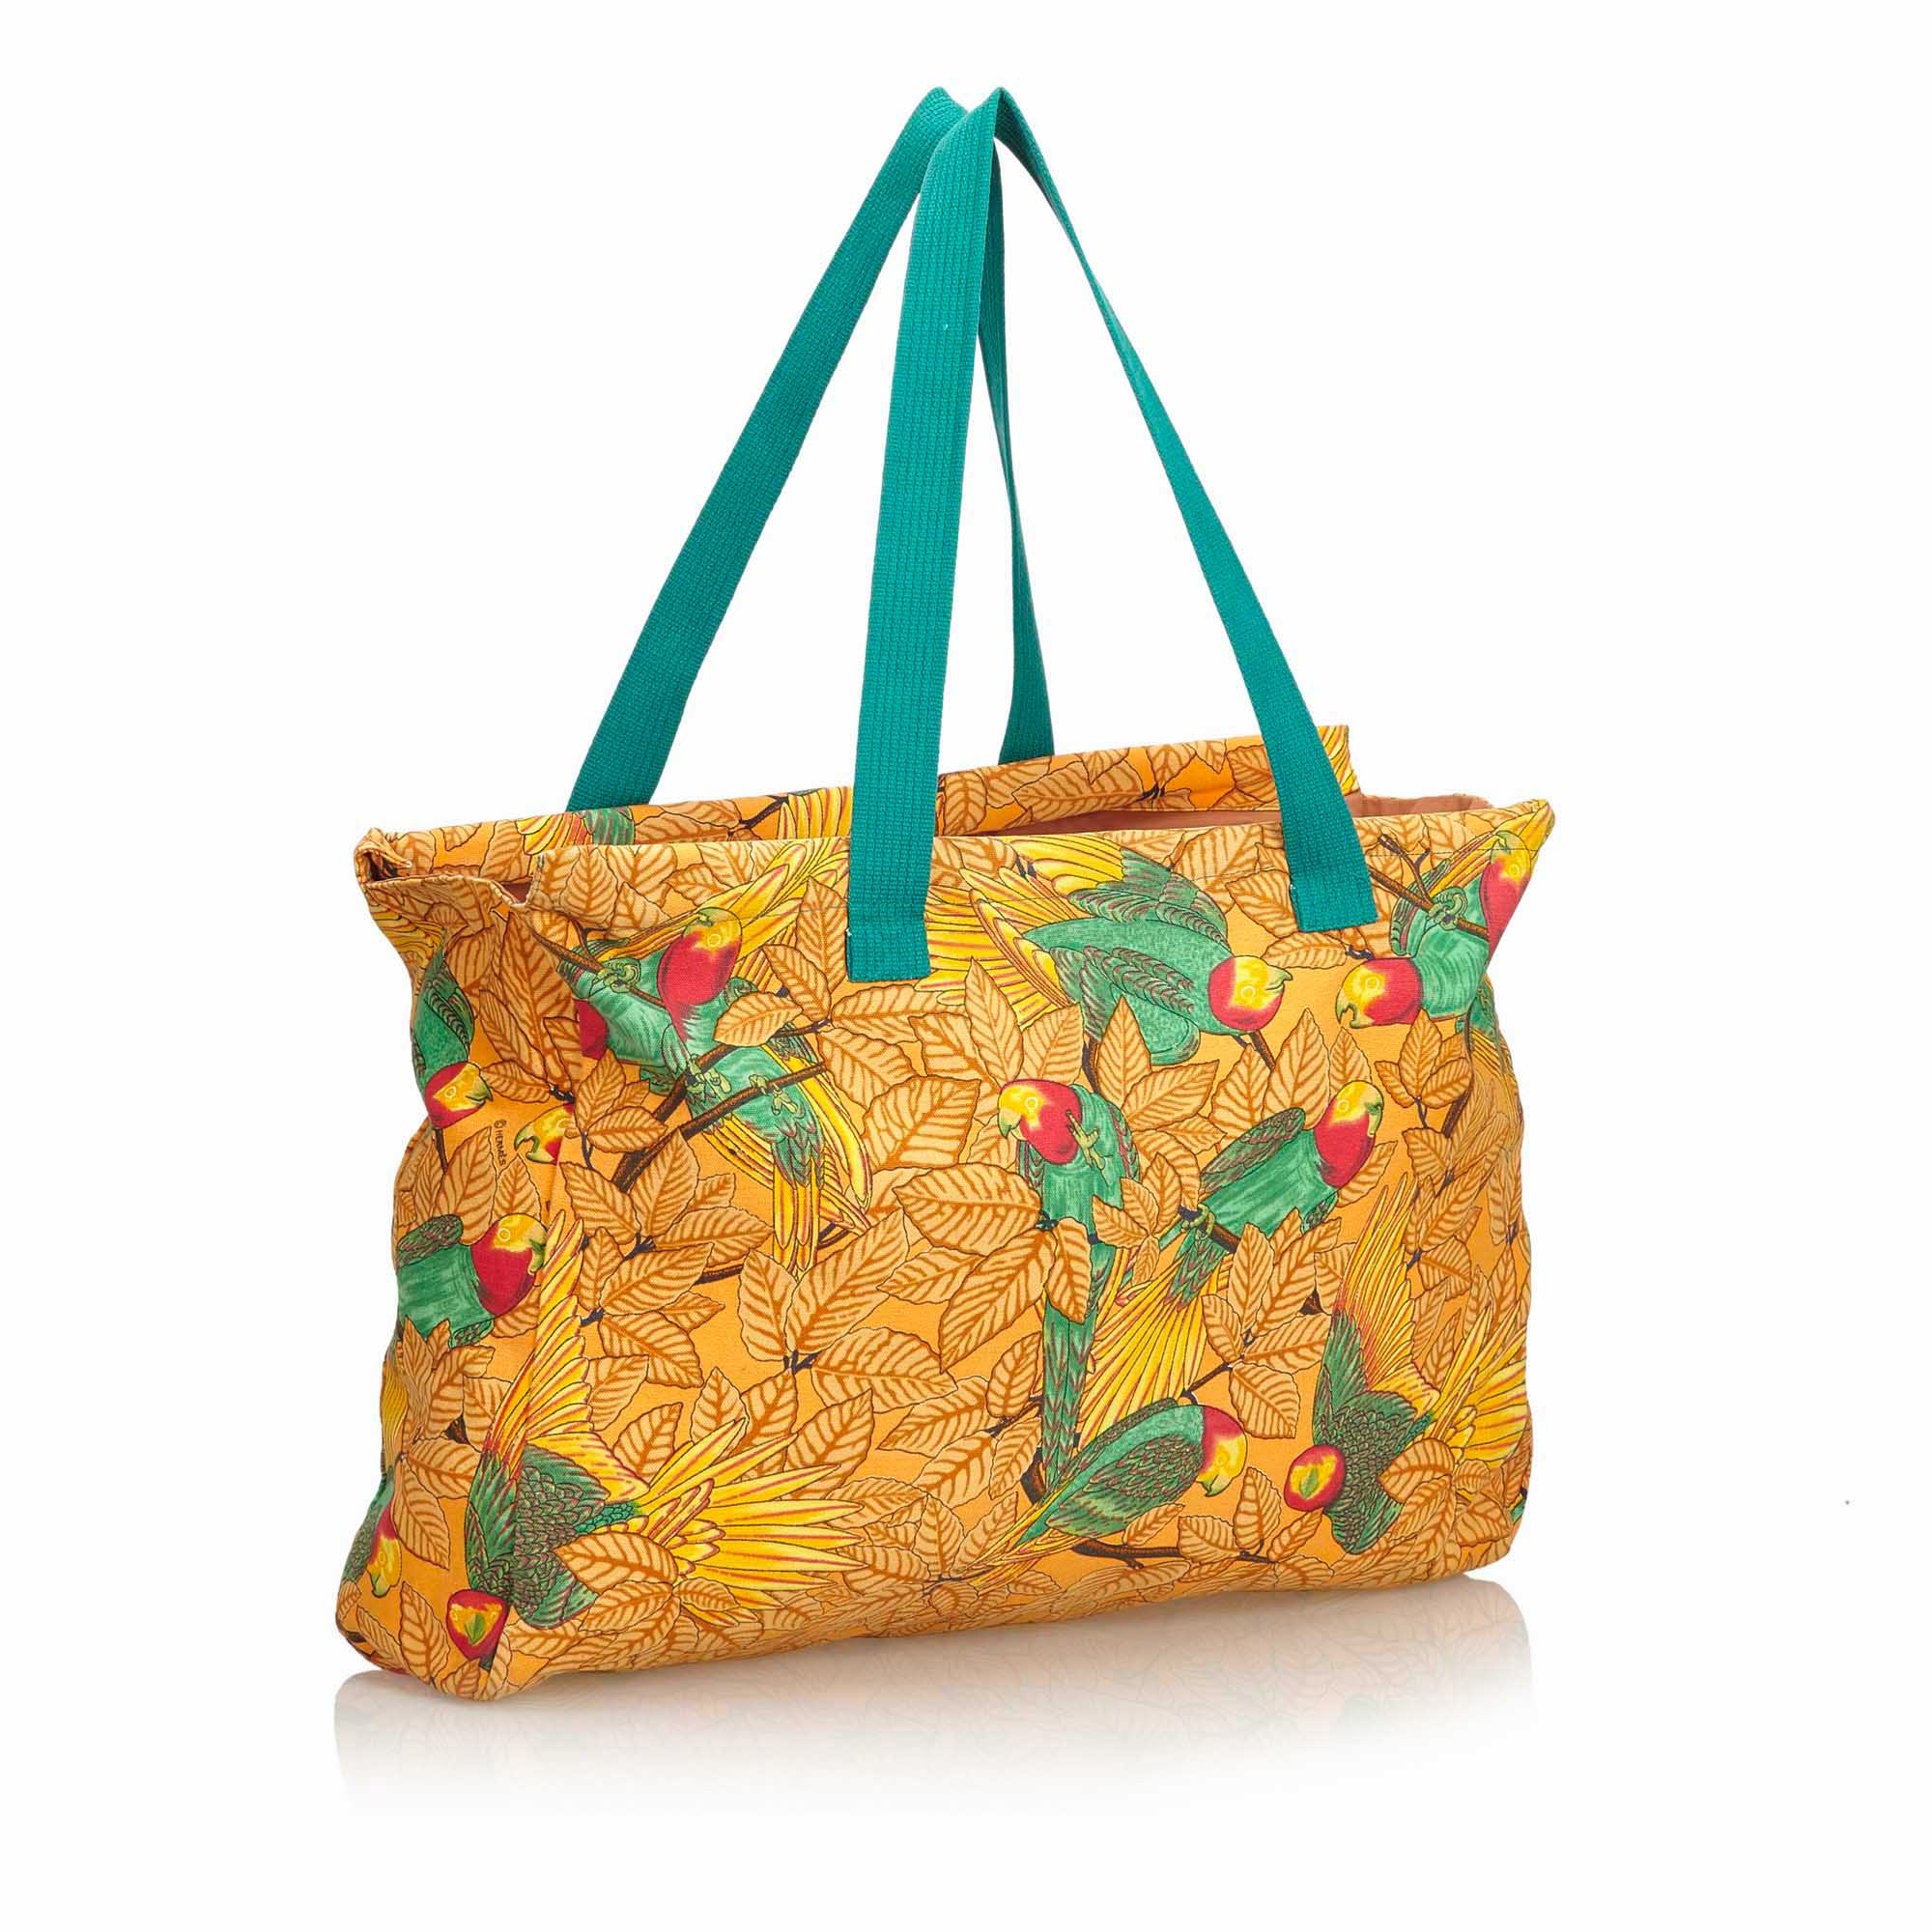 Hermes Printed Canvas Tote Bag, this tote bag features a printed canvas body, flat handles, and an - Image 2 of 10